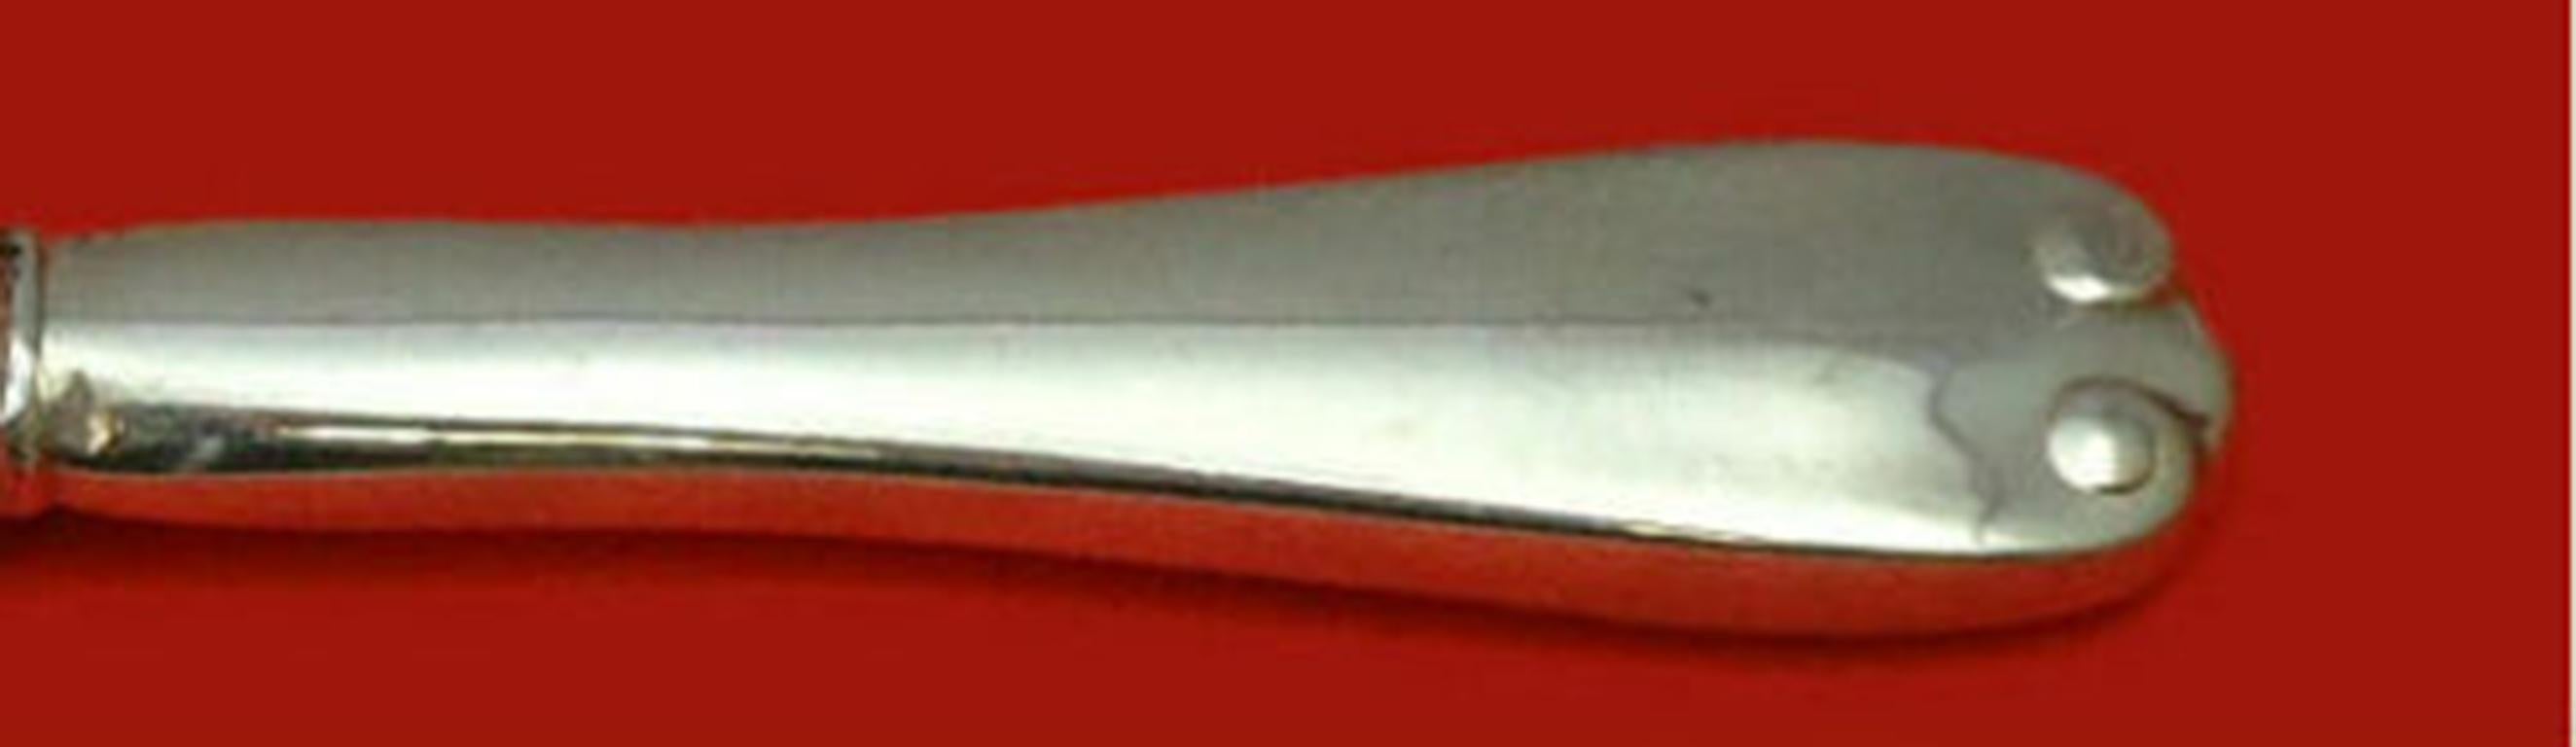 Sterling silver hollow handle fish knife, all-sterling 7 3/4